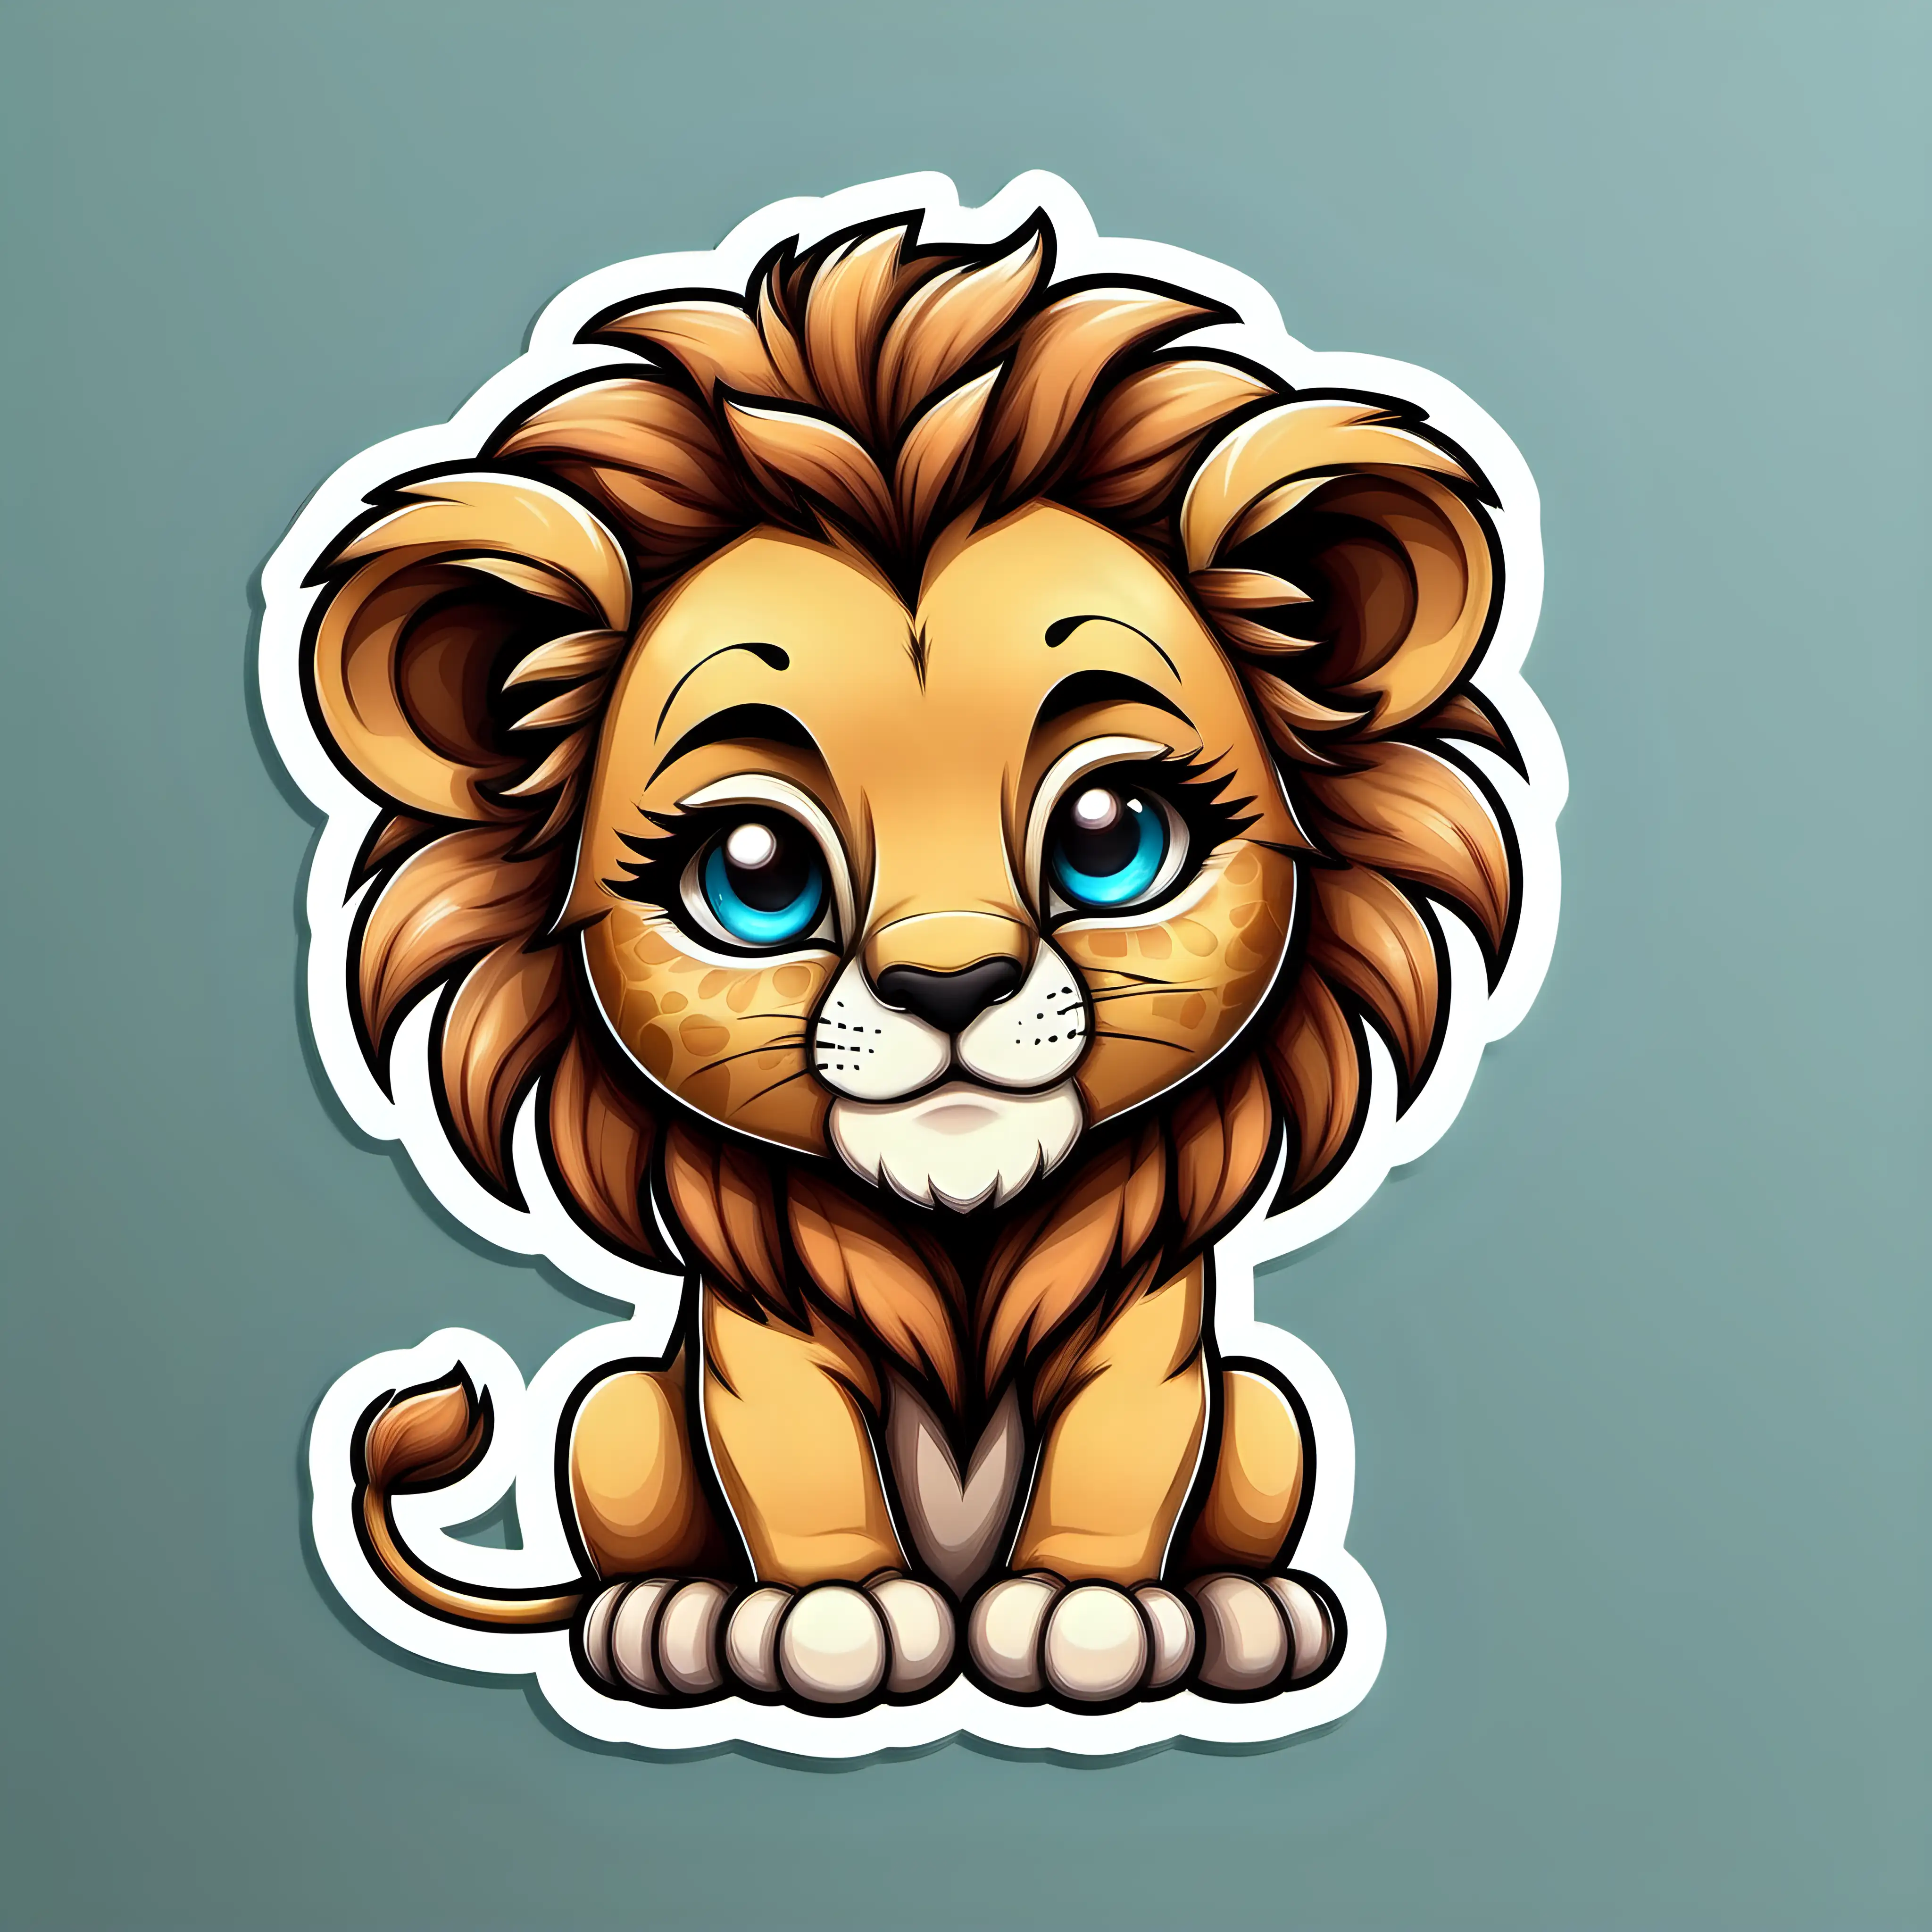 A baby cute lion, sticker style, ultra detailed